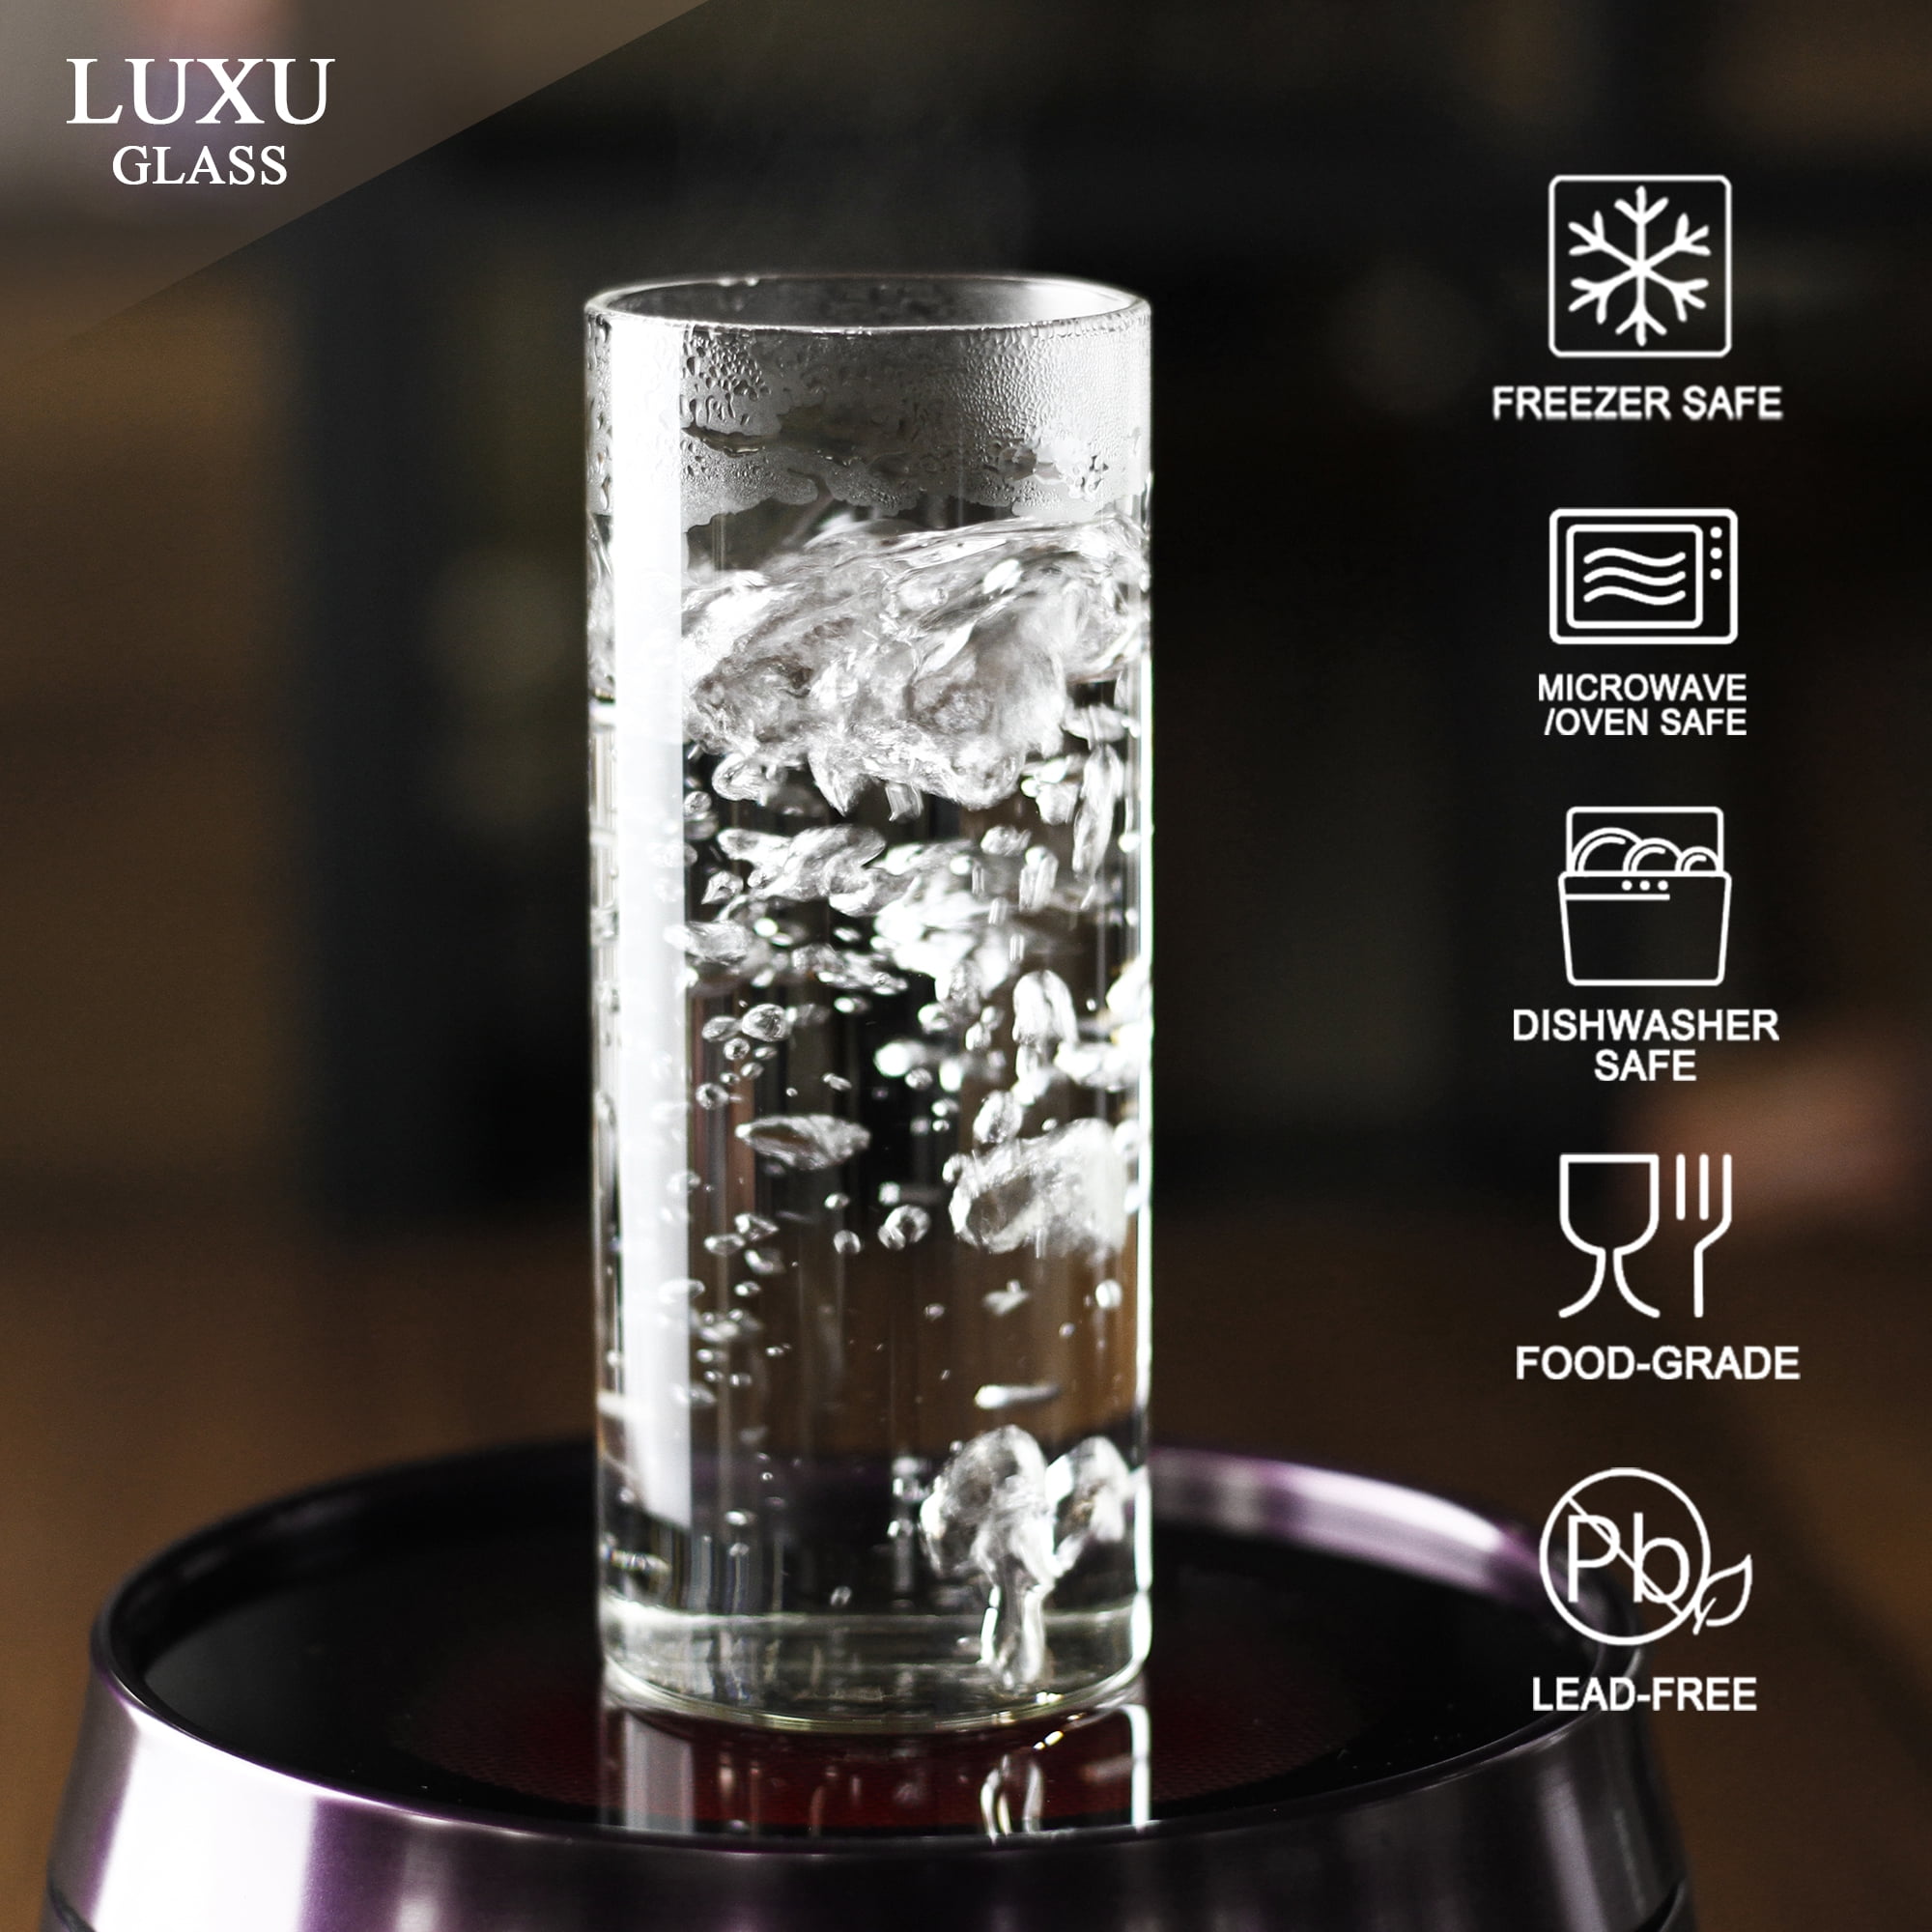 Kitchen Lux Square Drinking Glasses Set of 6 - Square Glass Cups 12 oz - Modern Glassware Set - Trendy Aesthetic Glass Ware for Highball Whiskey